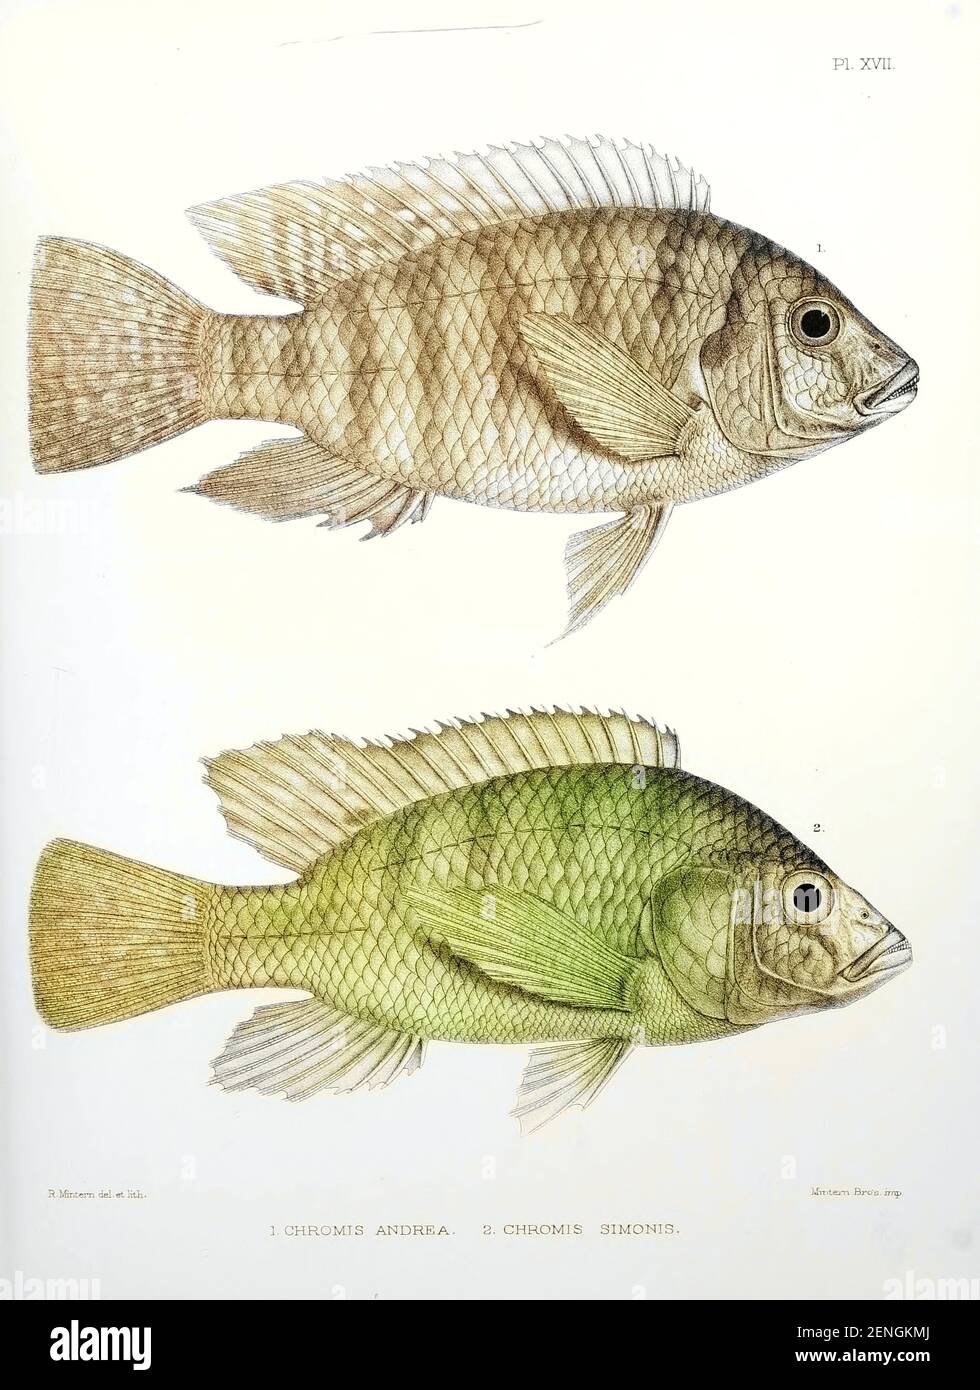 Machine colourized Chromis fish [Here as Chromis andrew and Chromis simonis] From the survey of western Palestine. The fauna and flora of Palestine by Tristram, H. B. (Henry Baker), 1822-1906 Published by The Committee of the Palestine Exploration Fund, London, 1884 Stock Photo